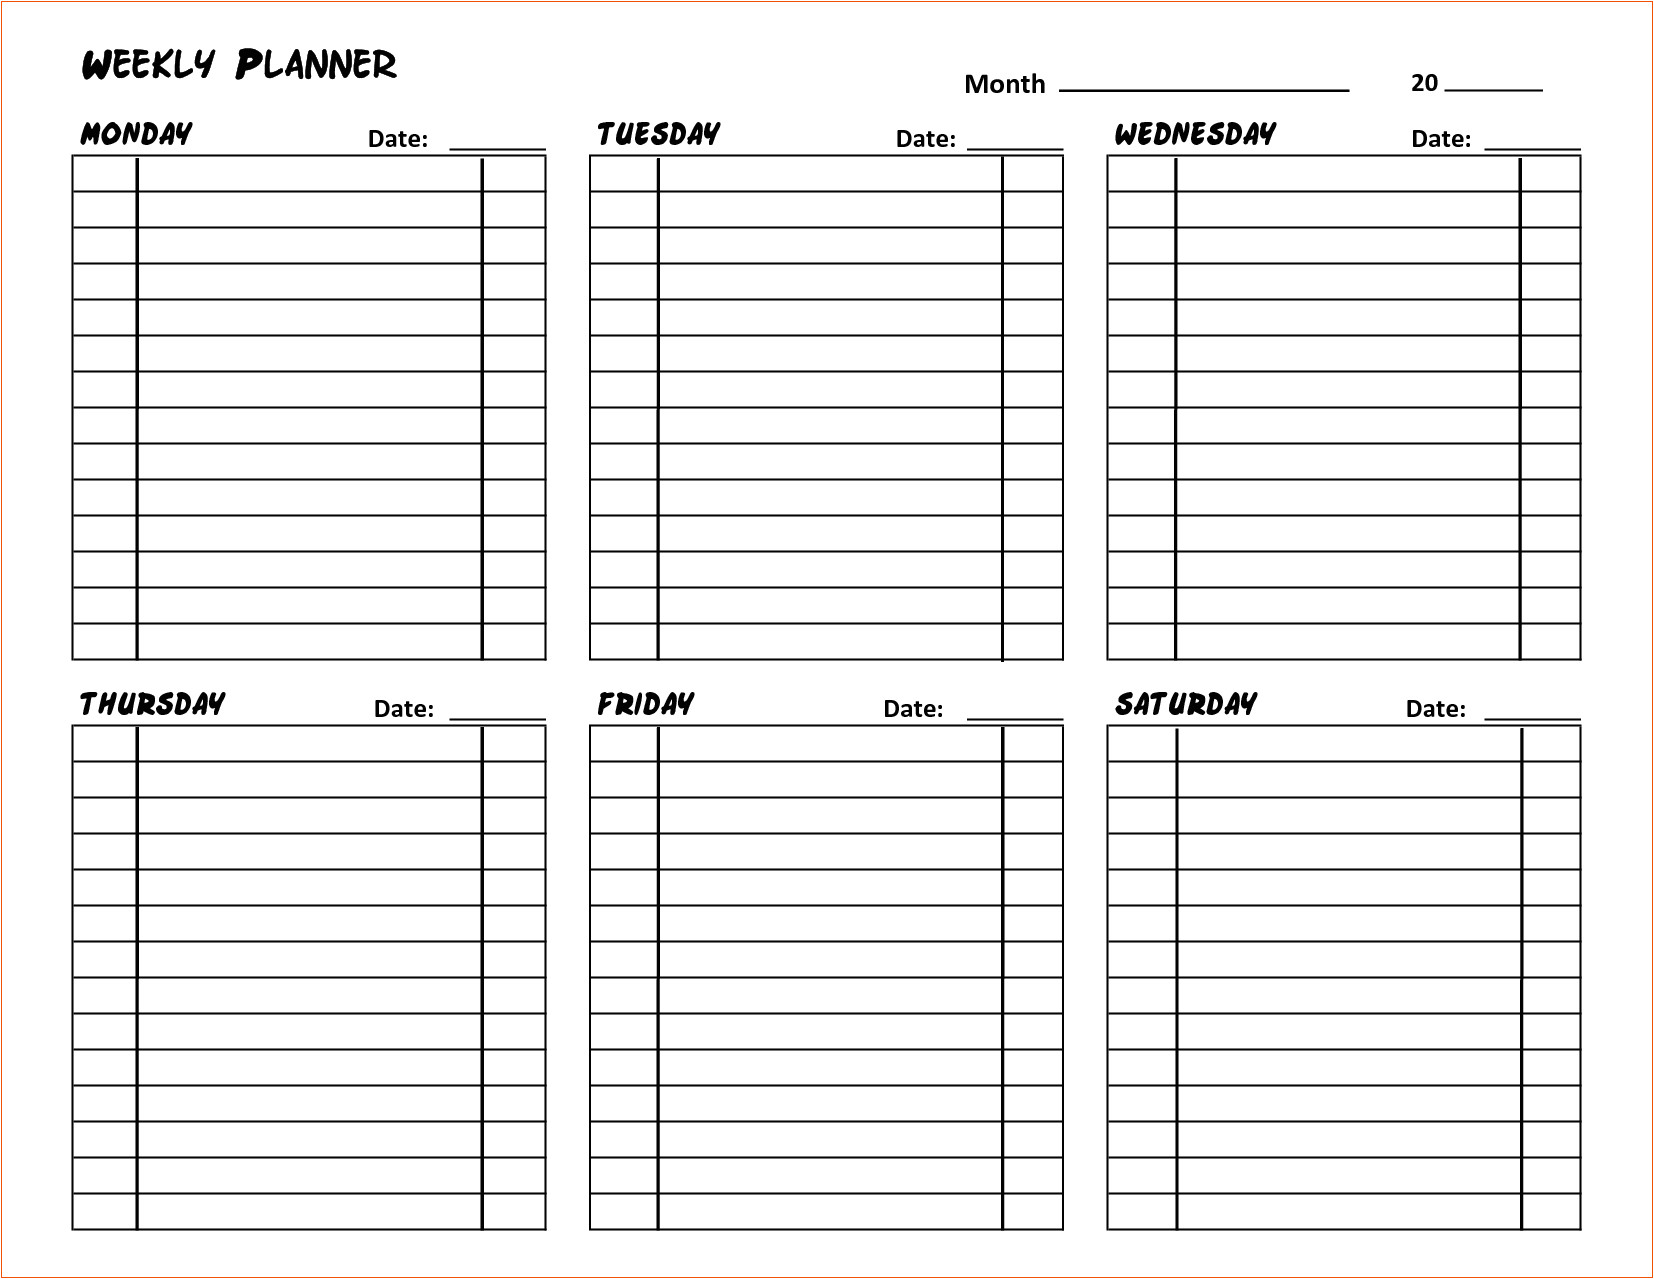 7 daily organizer template